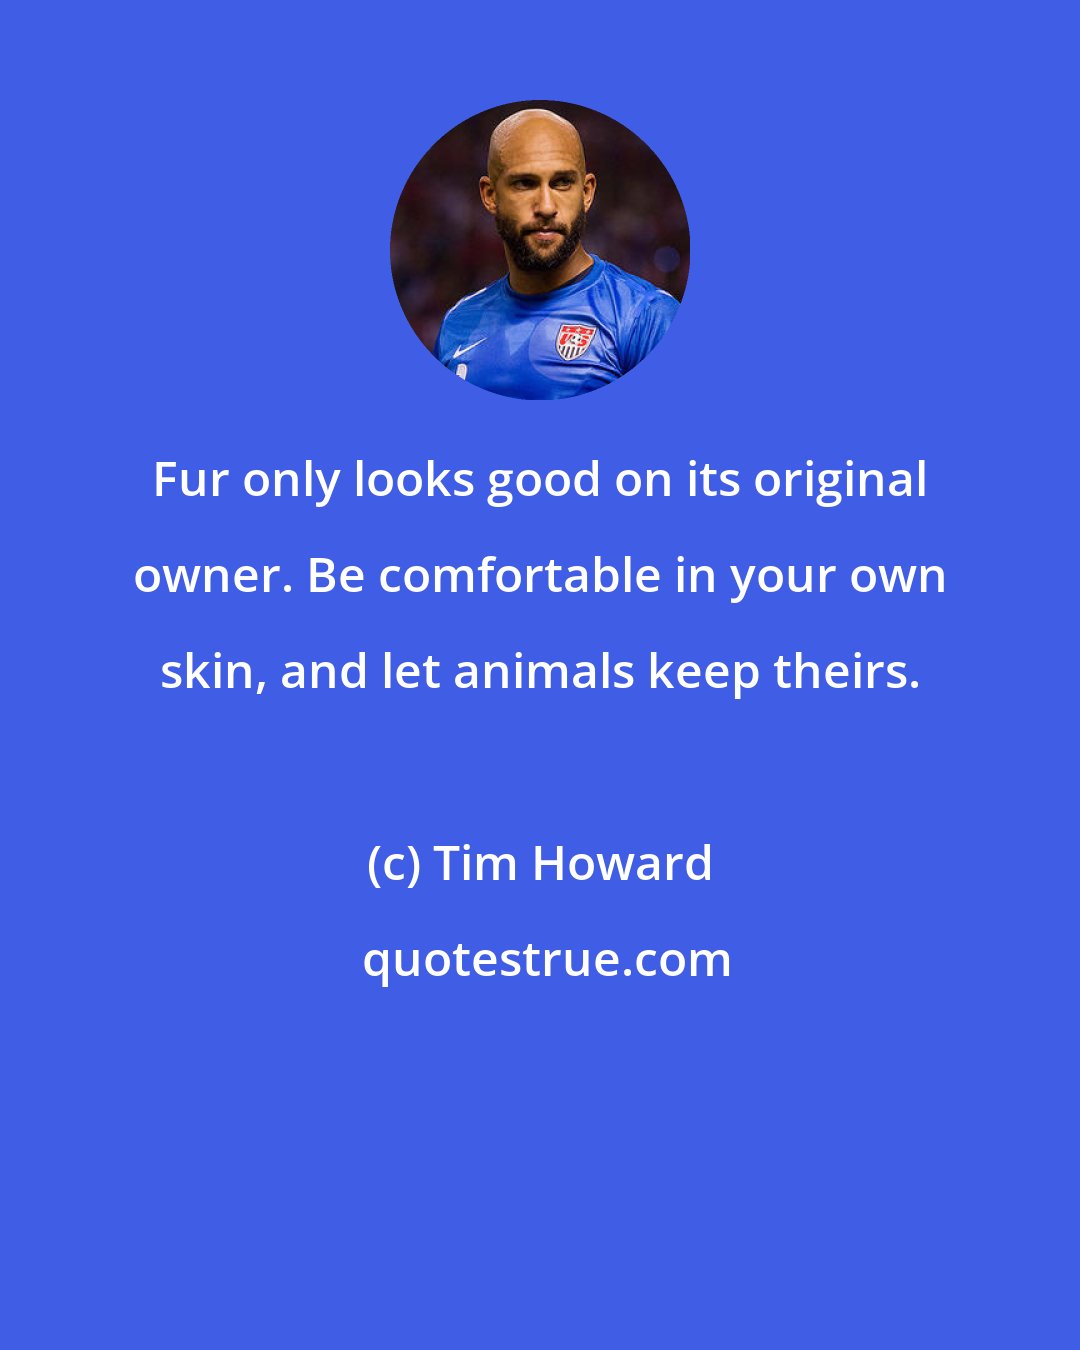 Tim Howard: Fur only looks good on its original owner. Be comfortable in your own skin, and let animals keep theirs.